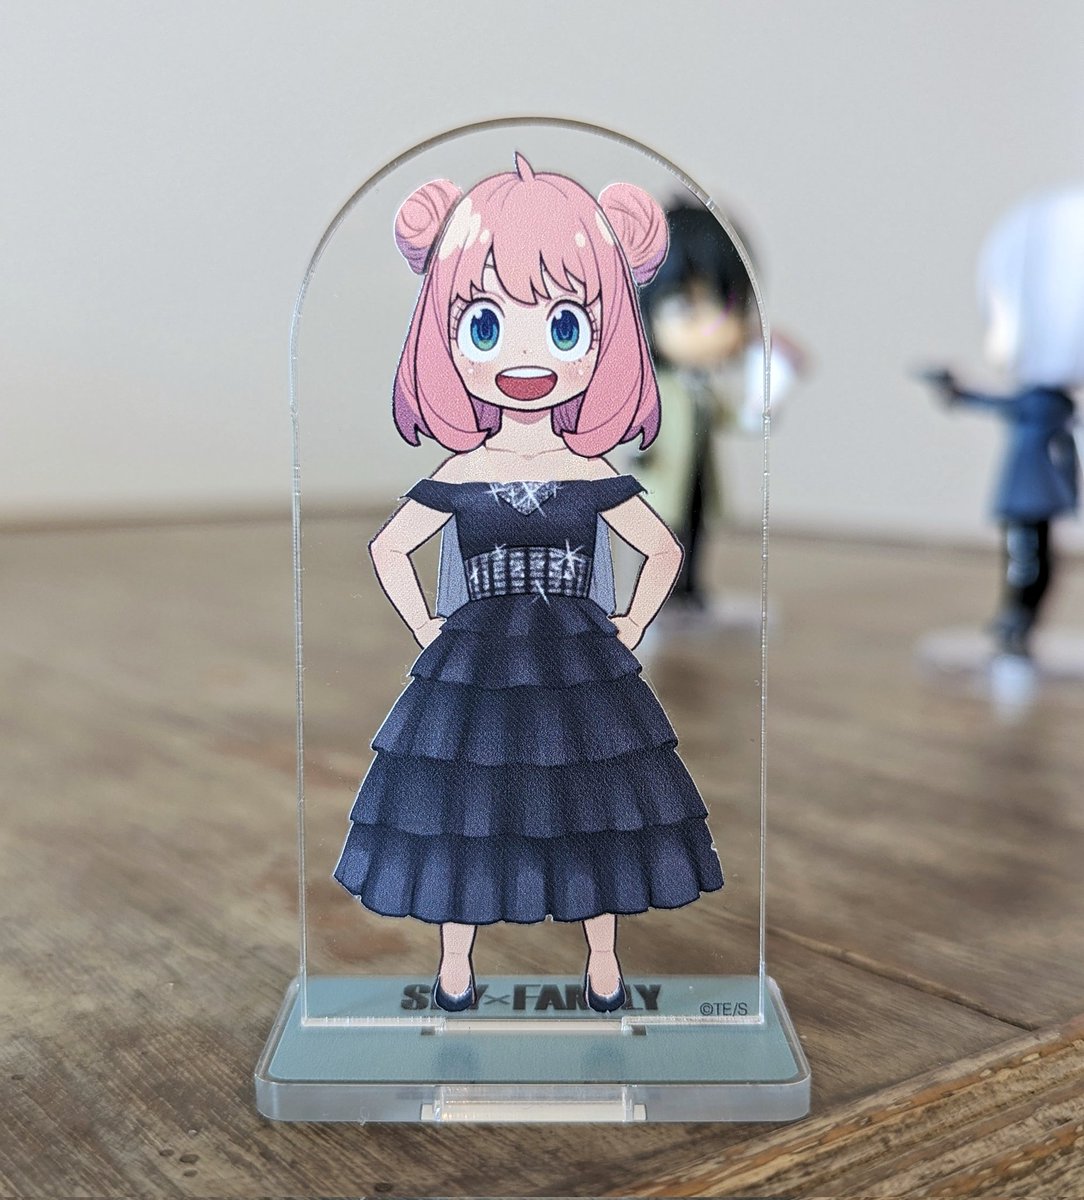 I made Anya's party dress for the volume 13 acrylic stands! It was a bit tricky but I'm happy enough with how it turned out 🩷